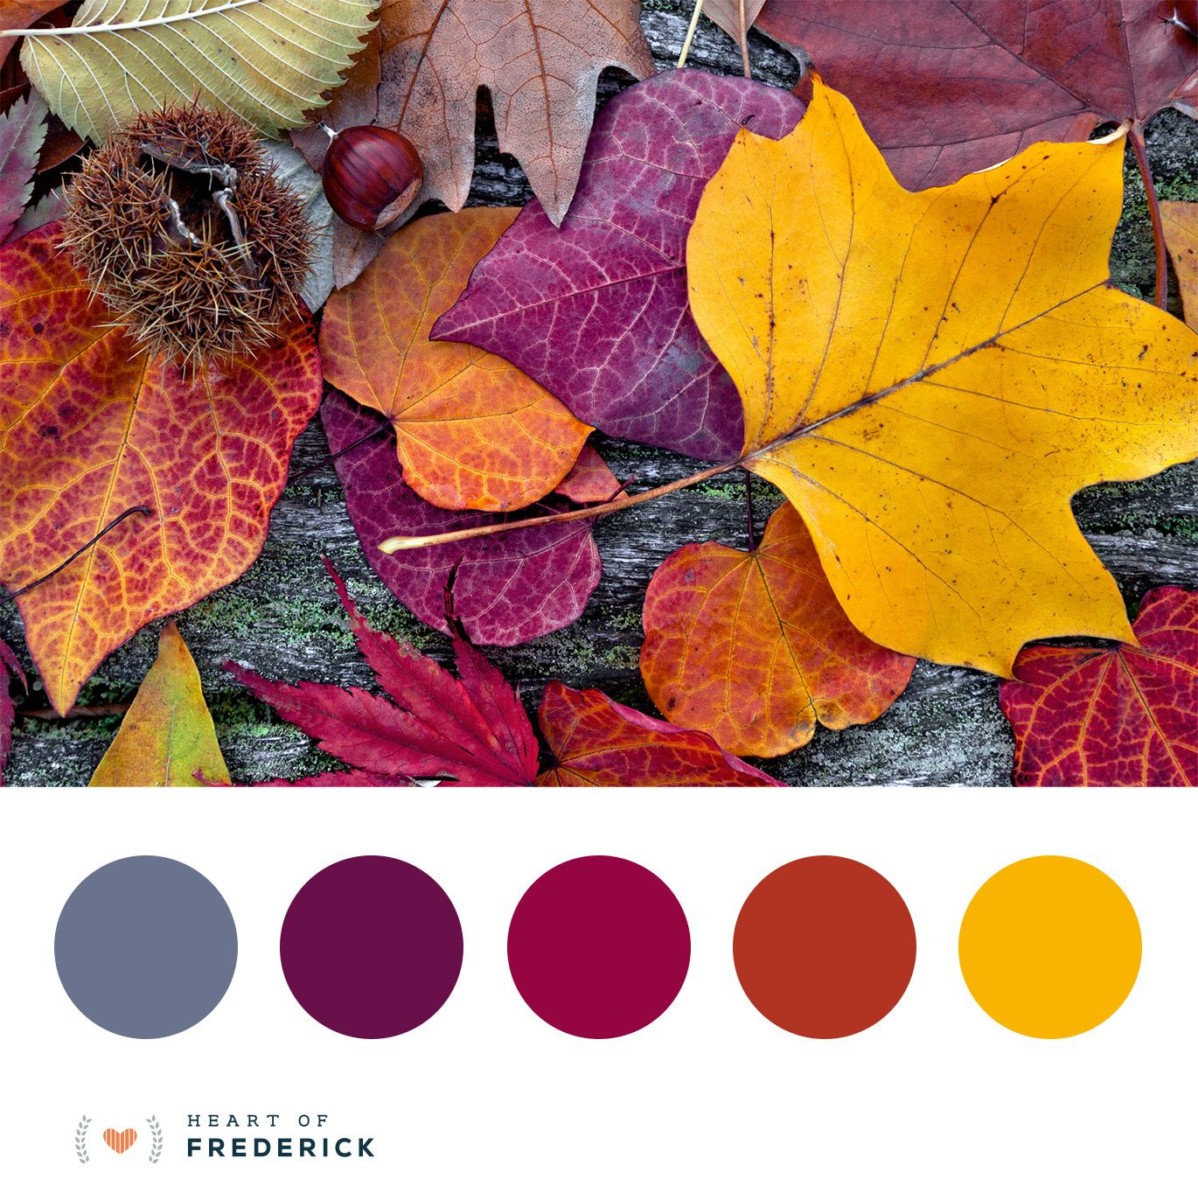 Beautiful Fall Leaves Color Palette